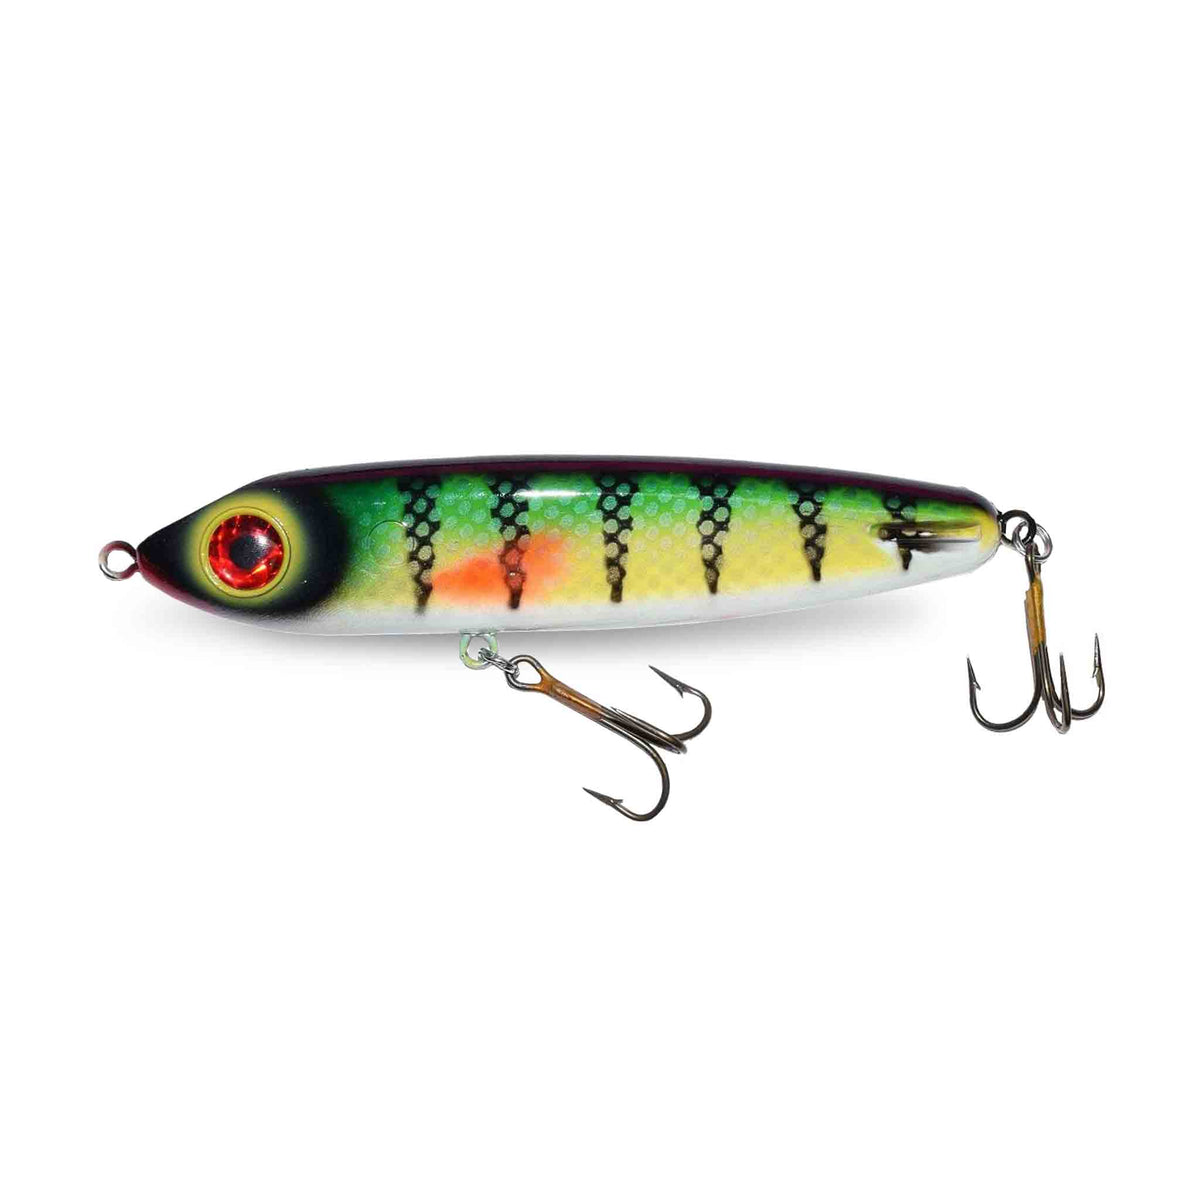 View of Jerk-Glide_Baits ERC Hell Hound 8'' Glide Bait Perch available at EZOKO Pike and Musky Shop